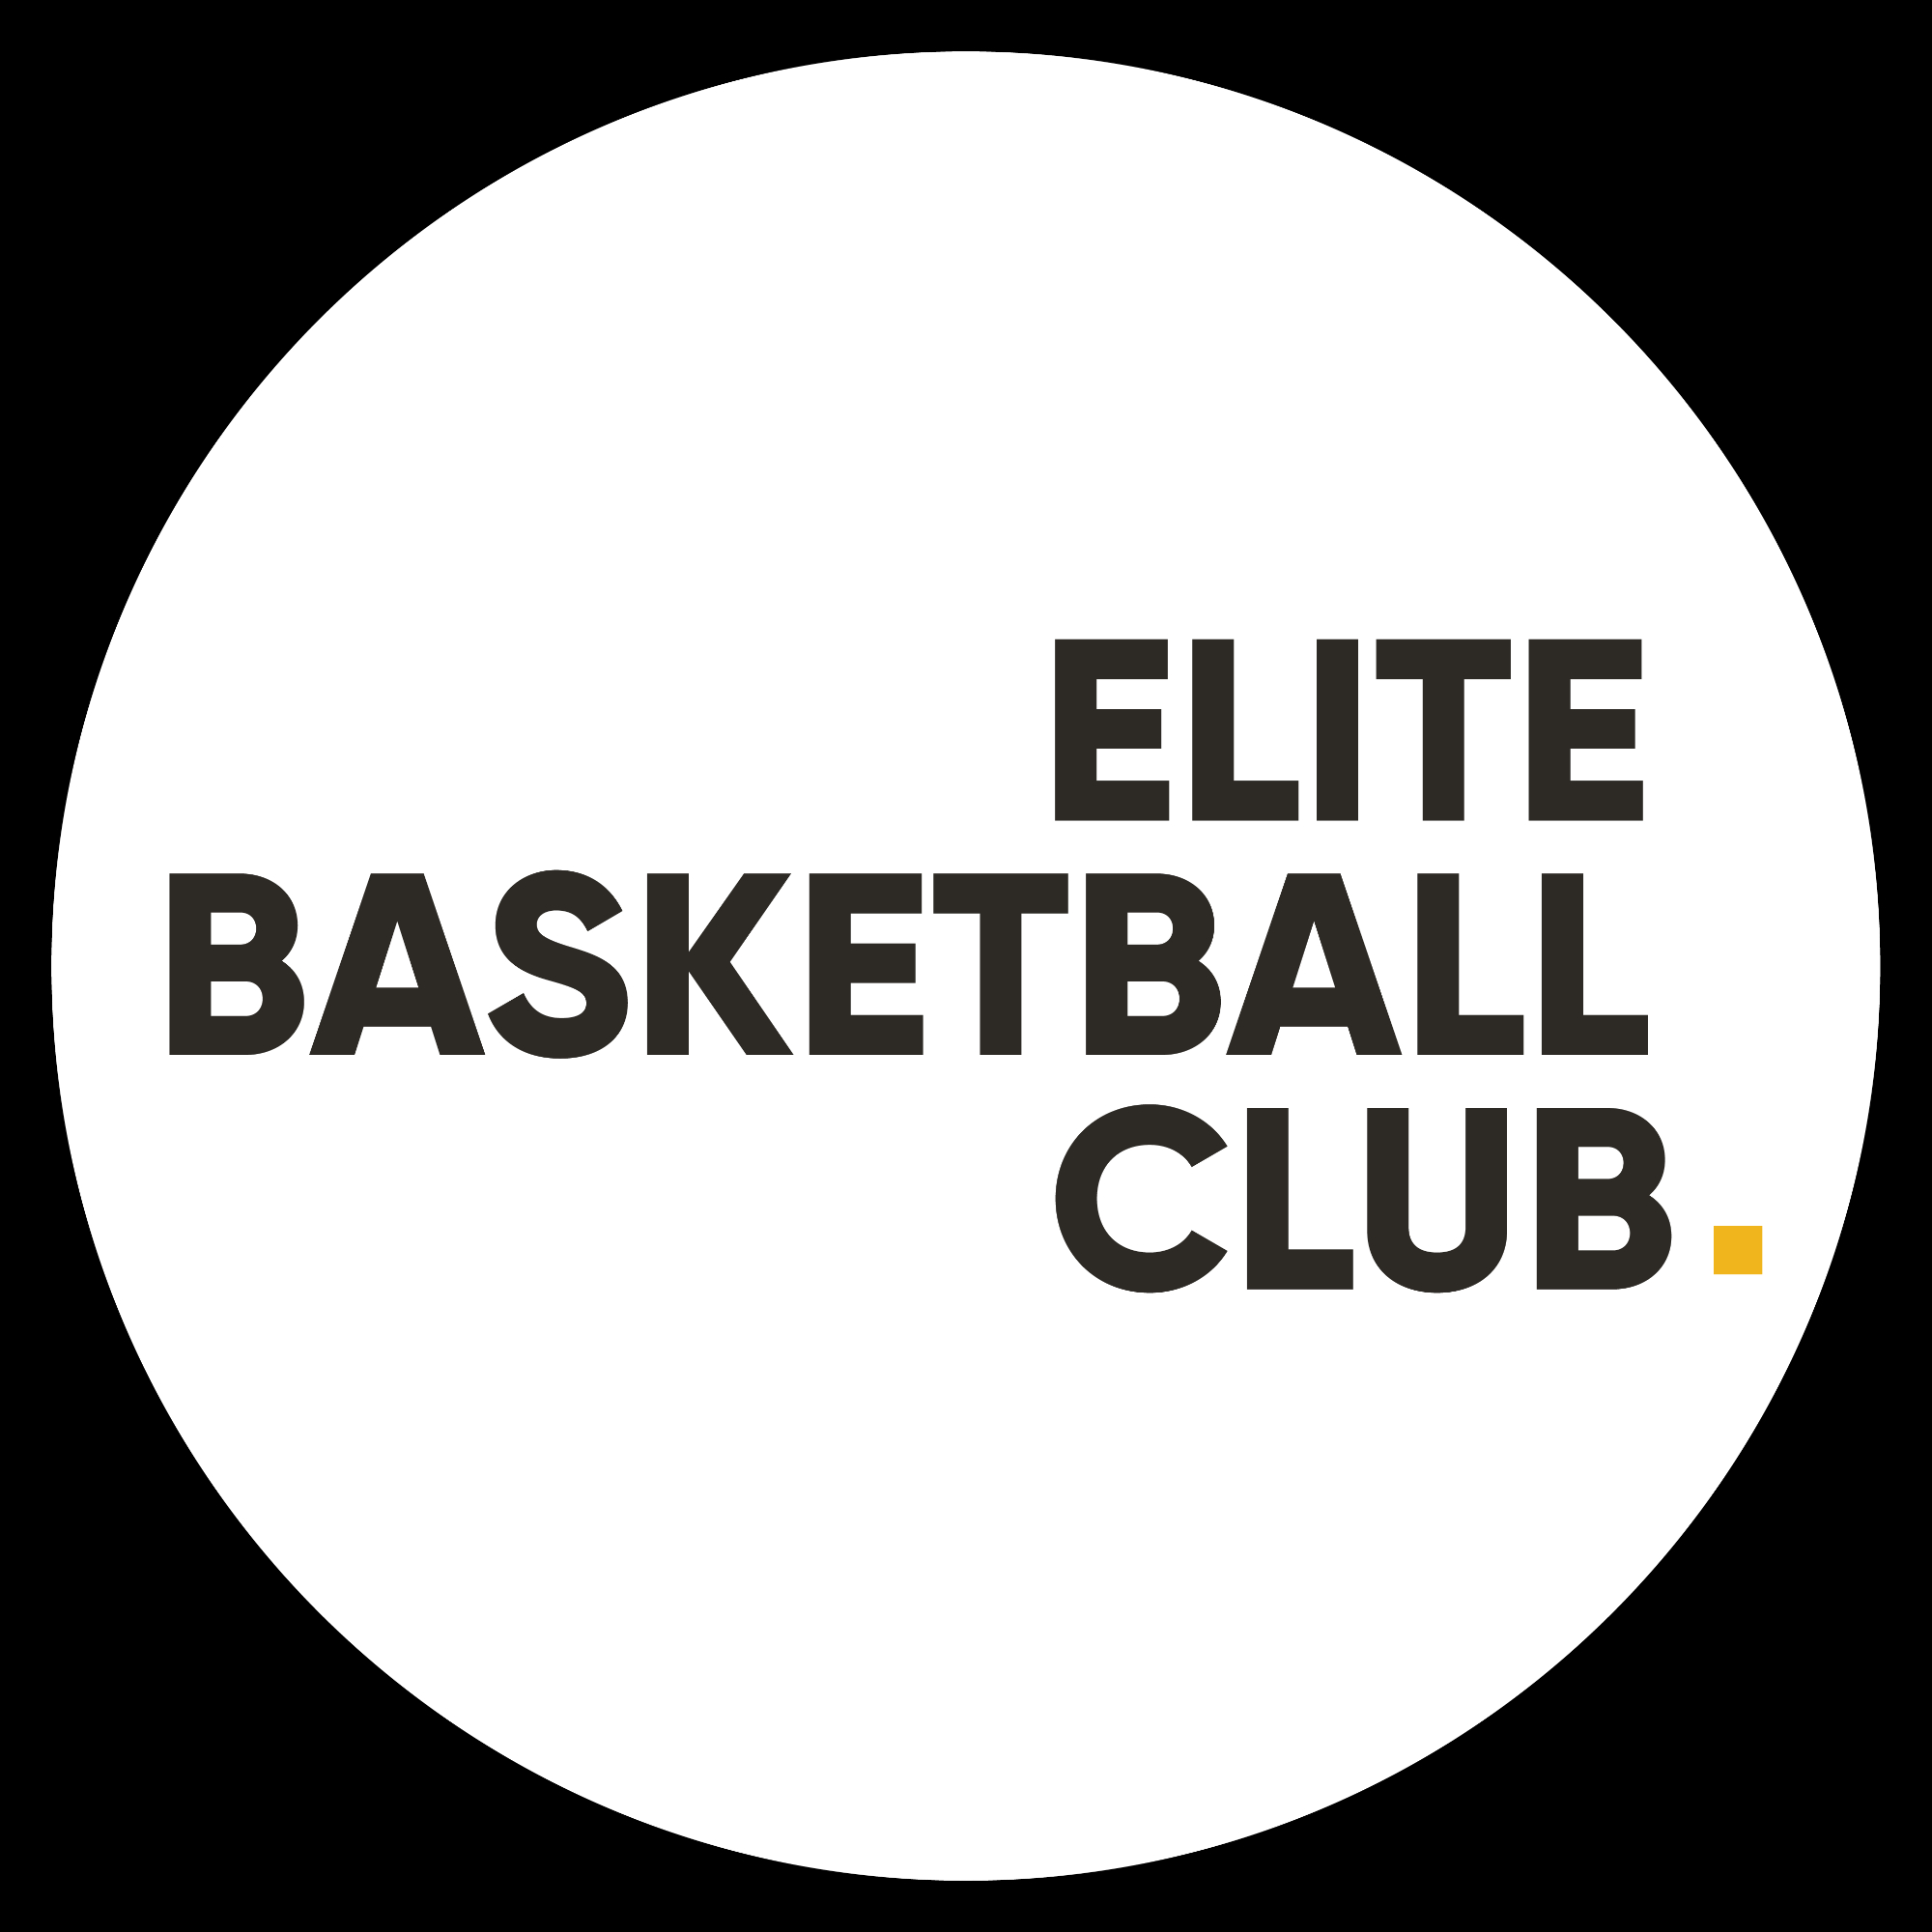 The official logo of Elite Basketball Club